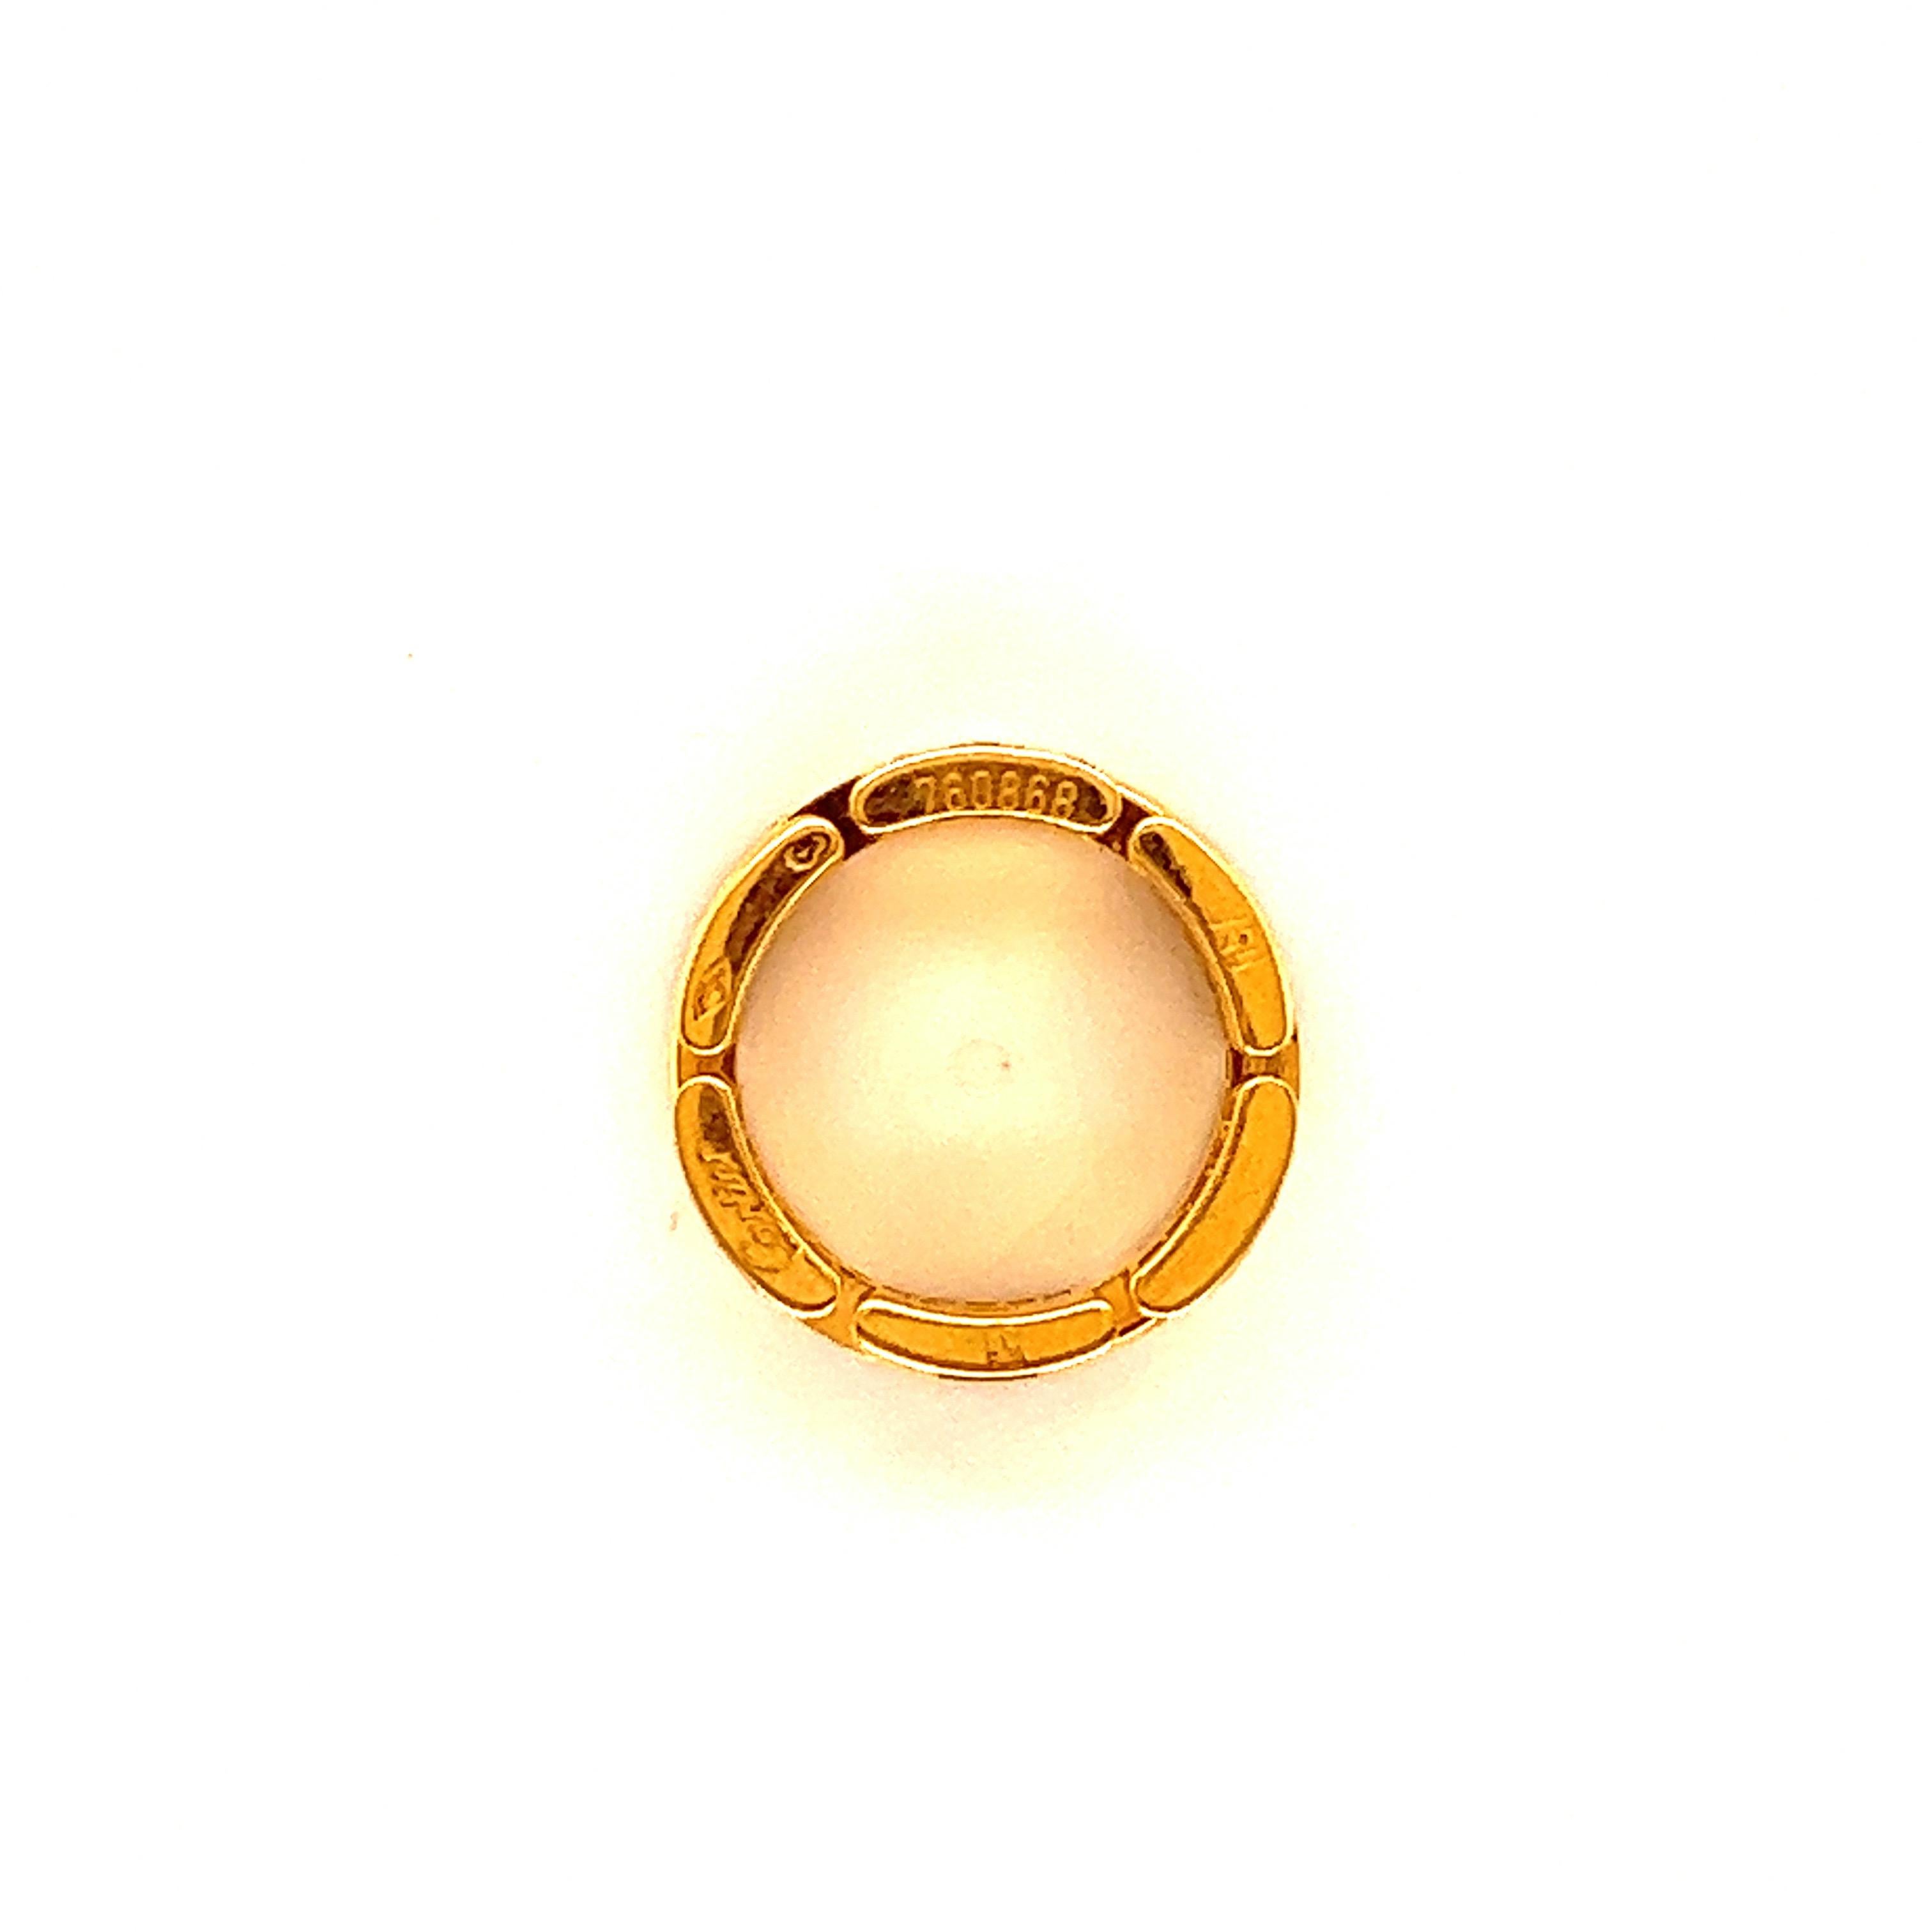 Classic Maillon Panthere 18k yellow gold band ring, by Cartier. 
Round brilliant-cut diamonds of approximately 1 carat, most with E-F color and VS clarity, set on 18 karat yellow gold; Band width 7.5 mm, ring is a US size 5.5, Cartier size 51;